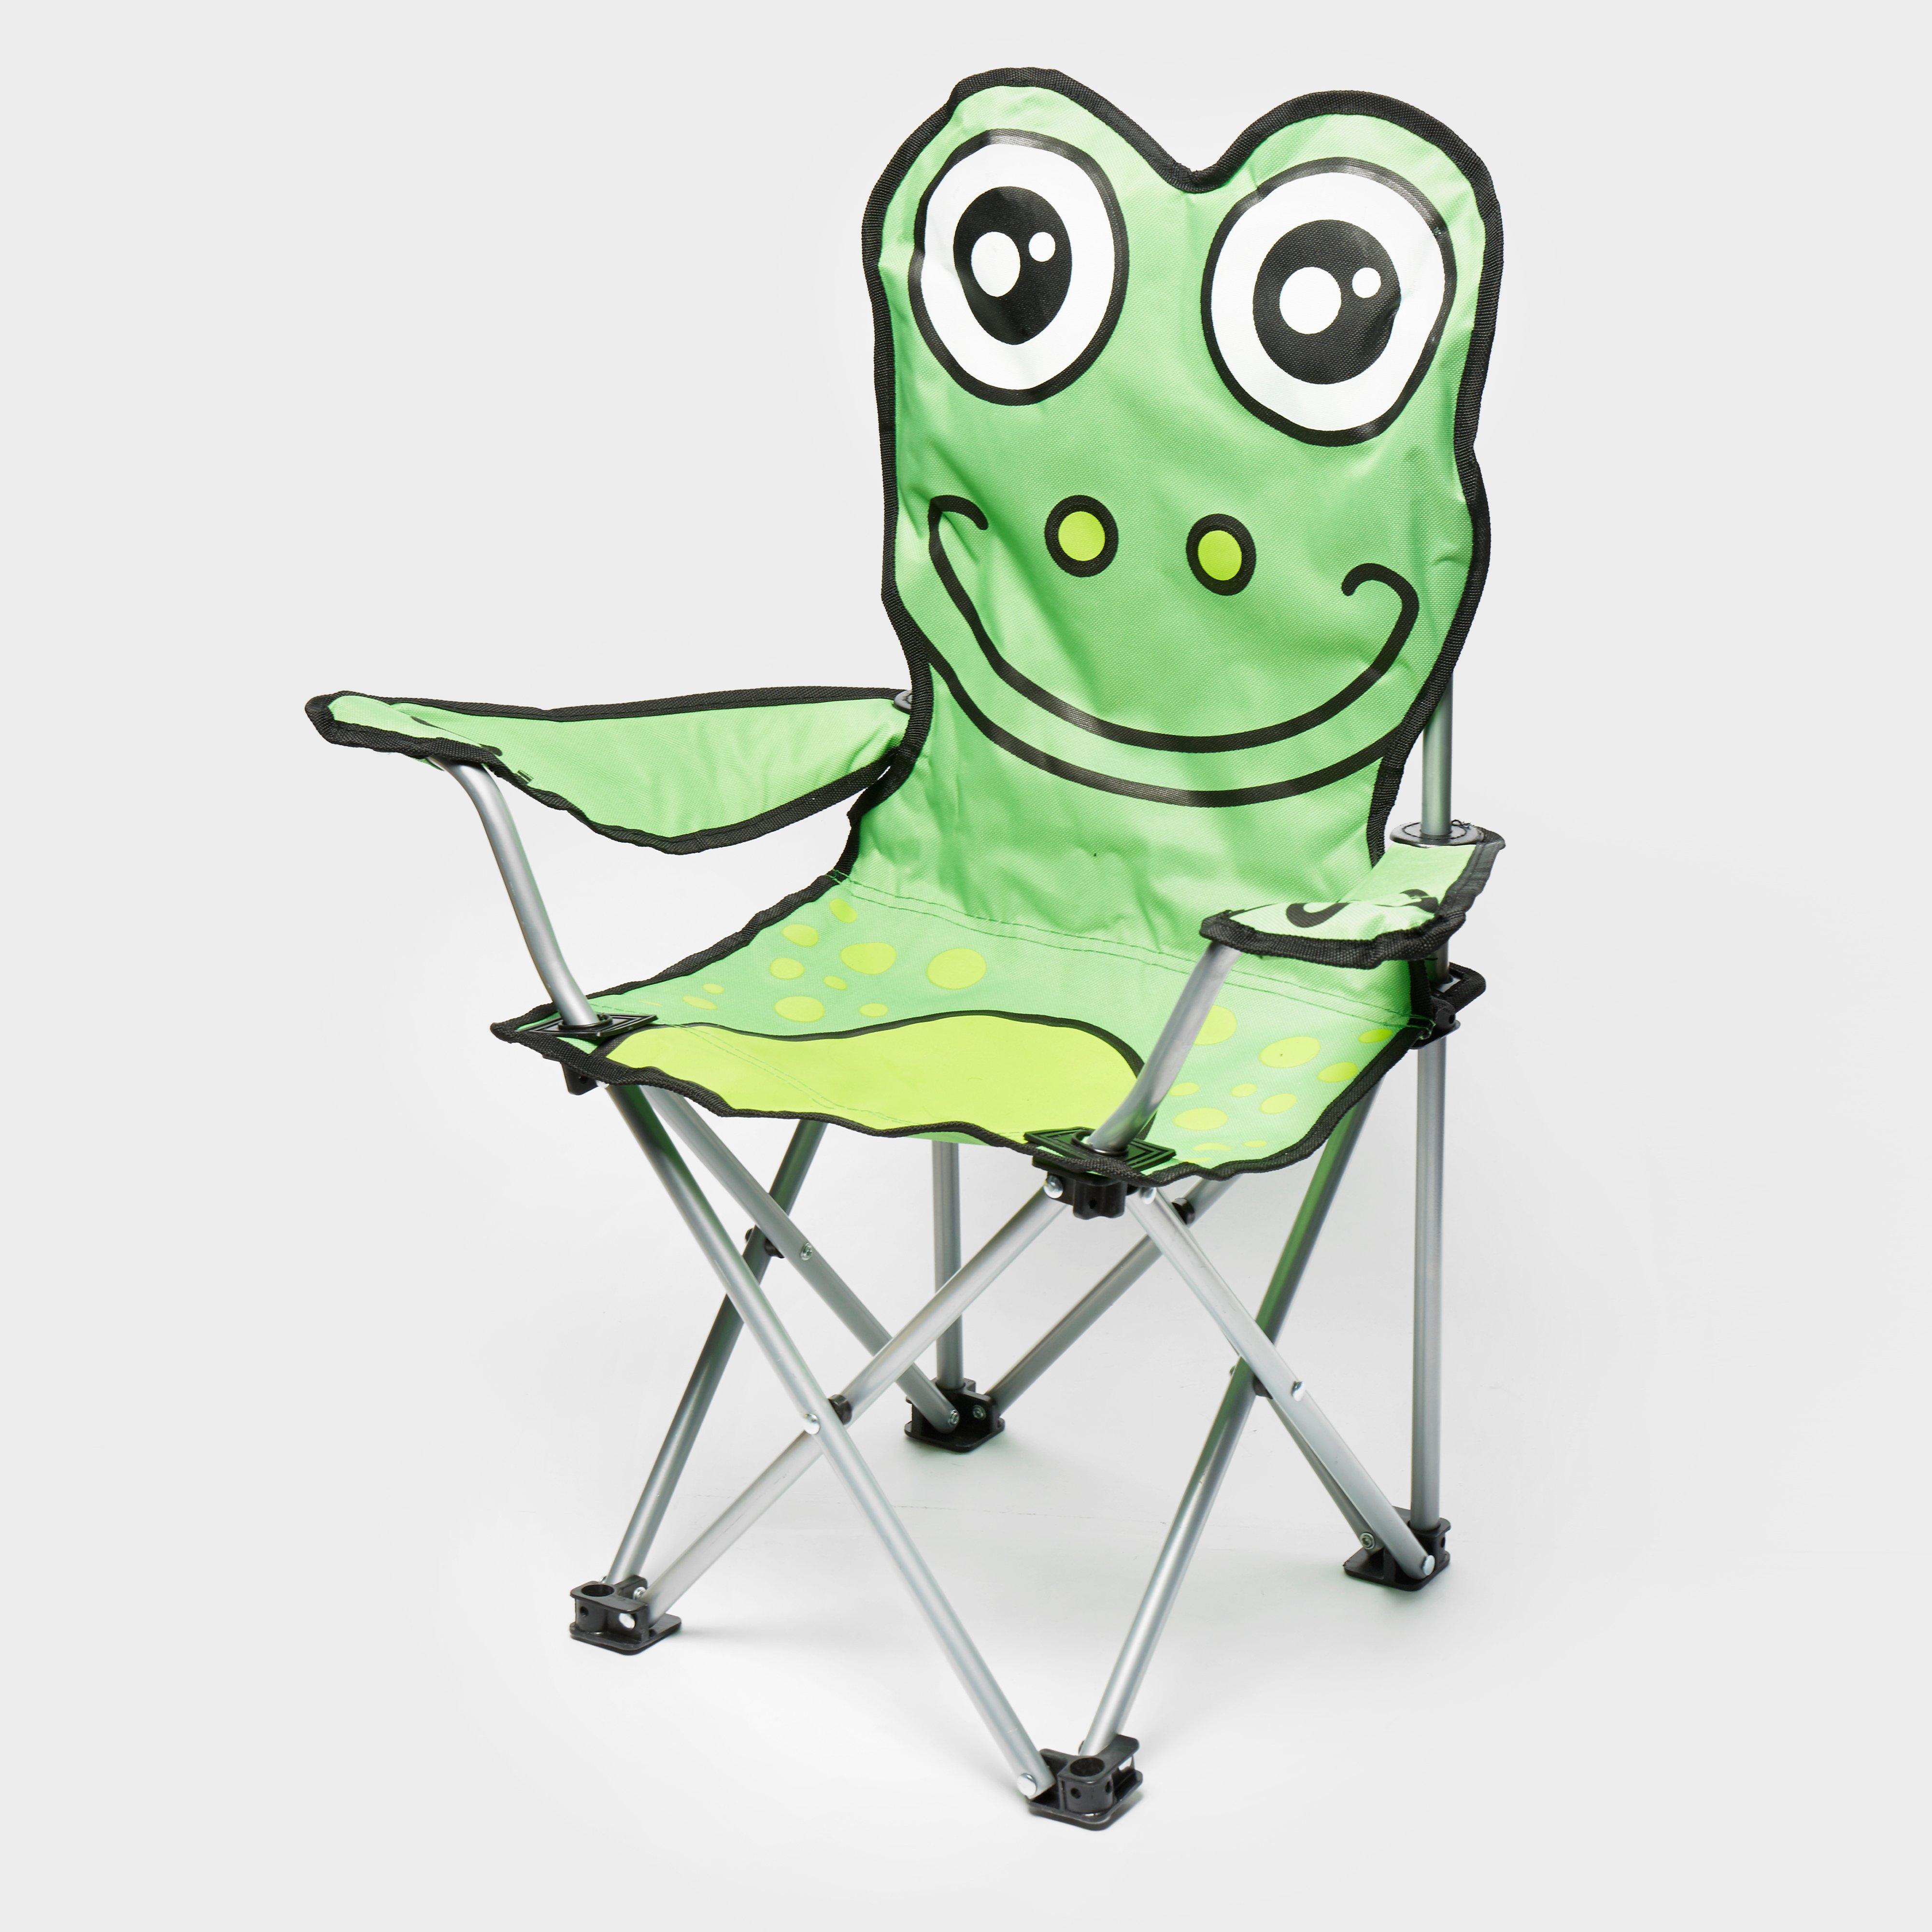 Image of Eurohike Frog Camping Chair - Green, Green